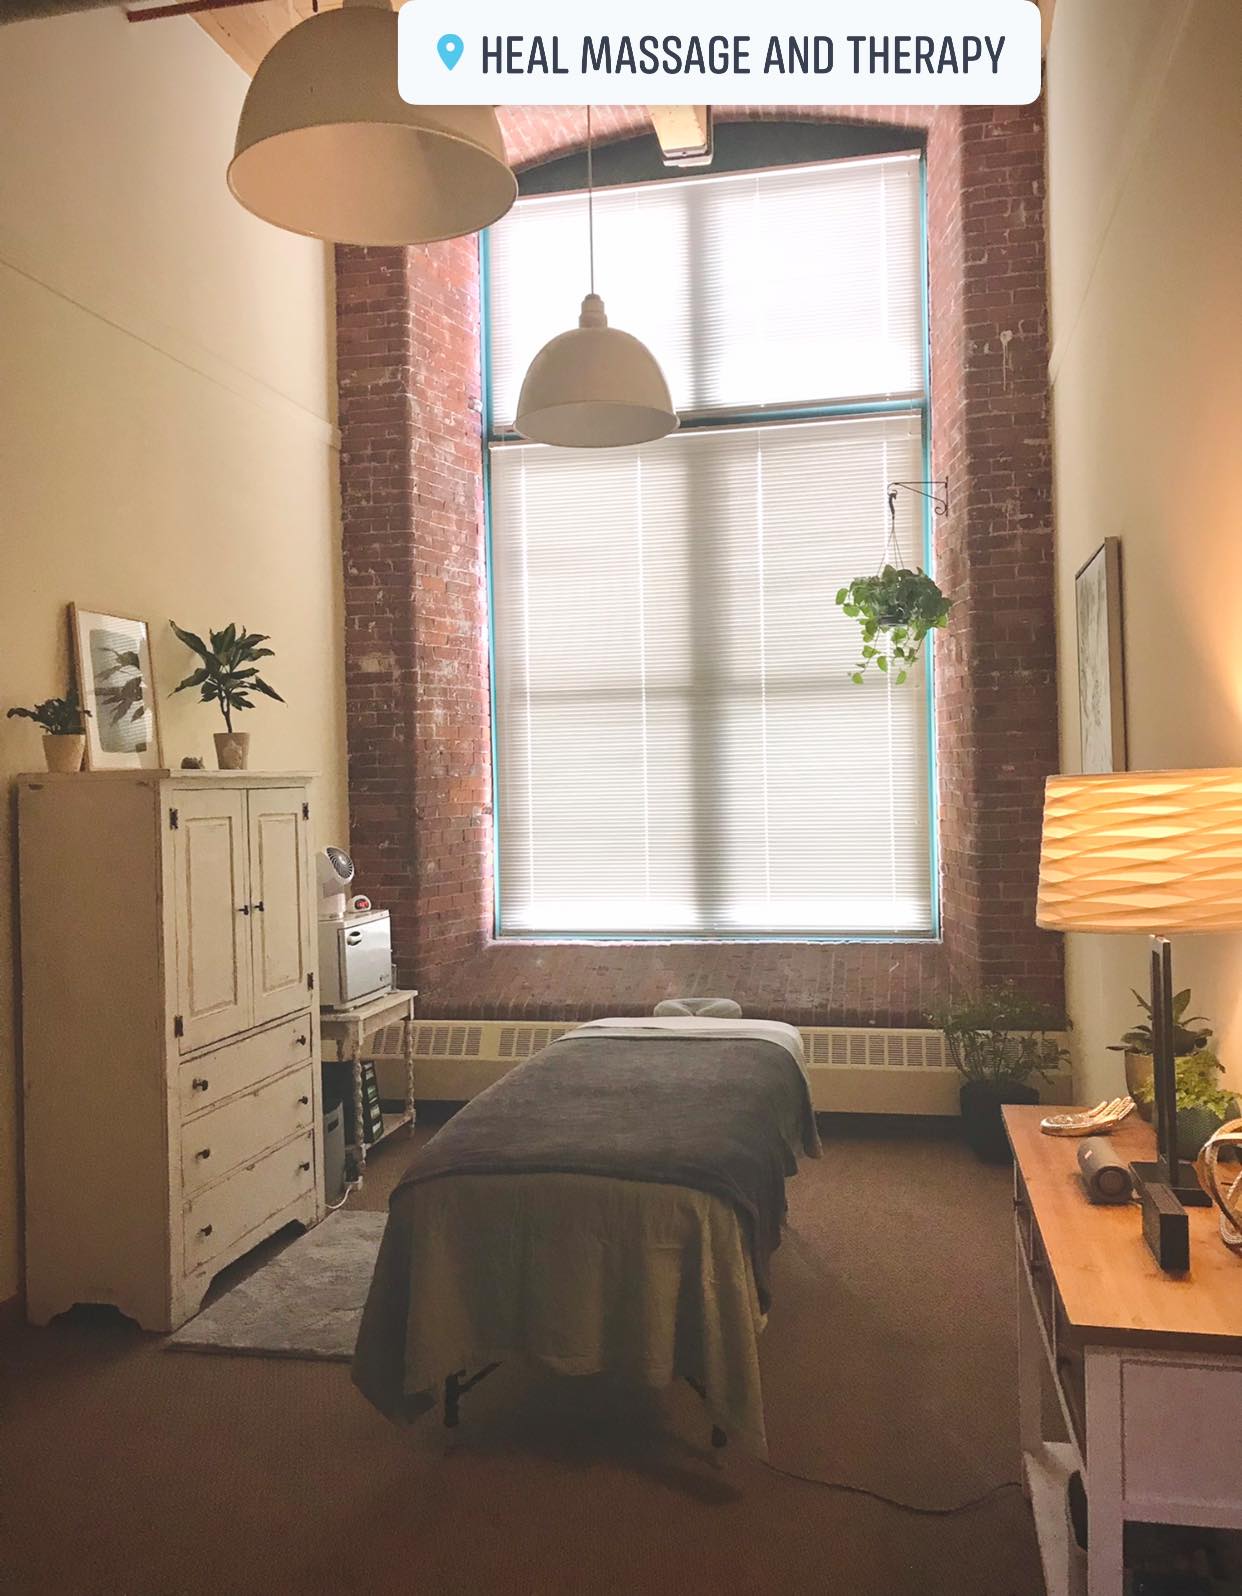 Heal massage and therapy room